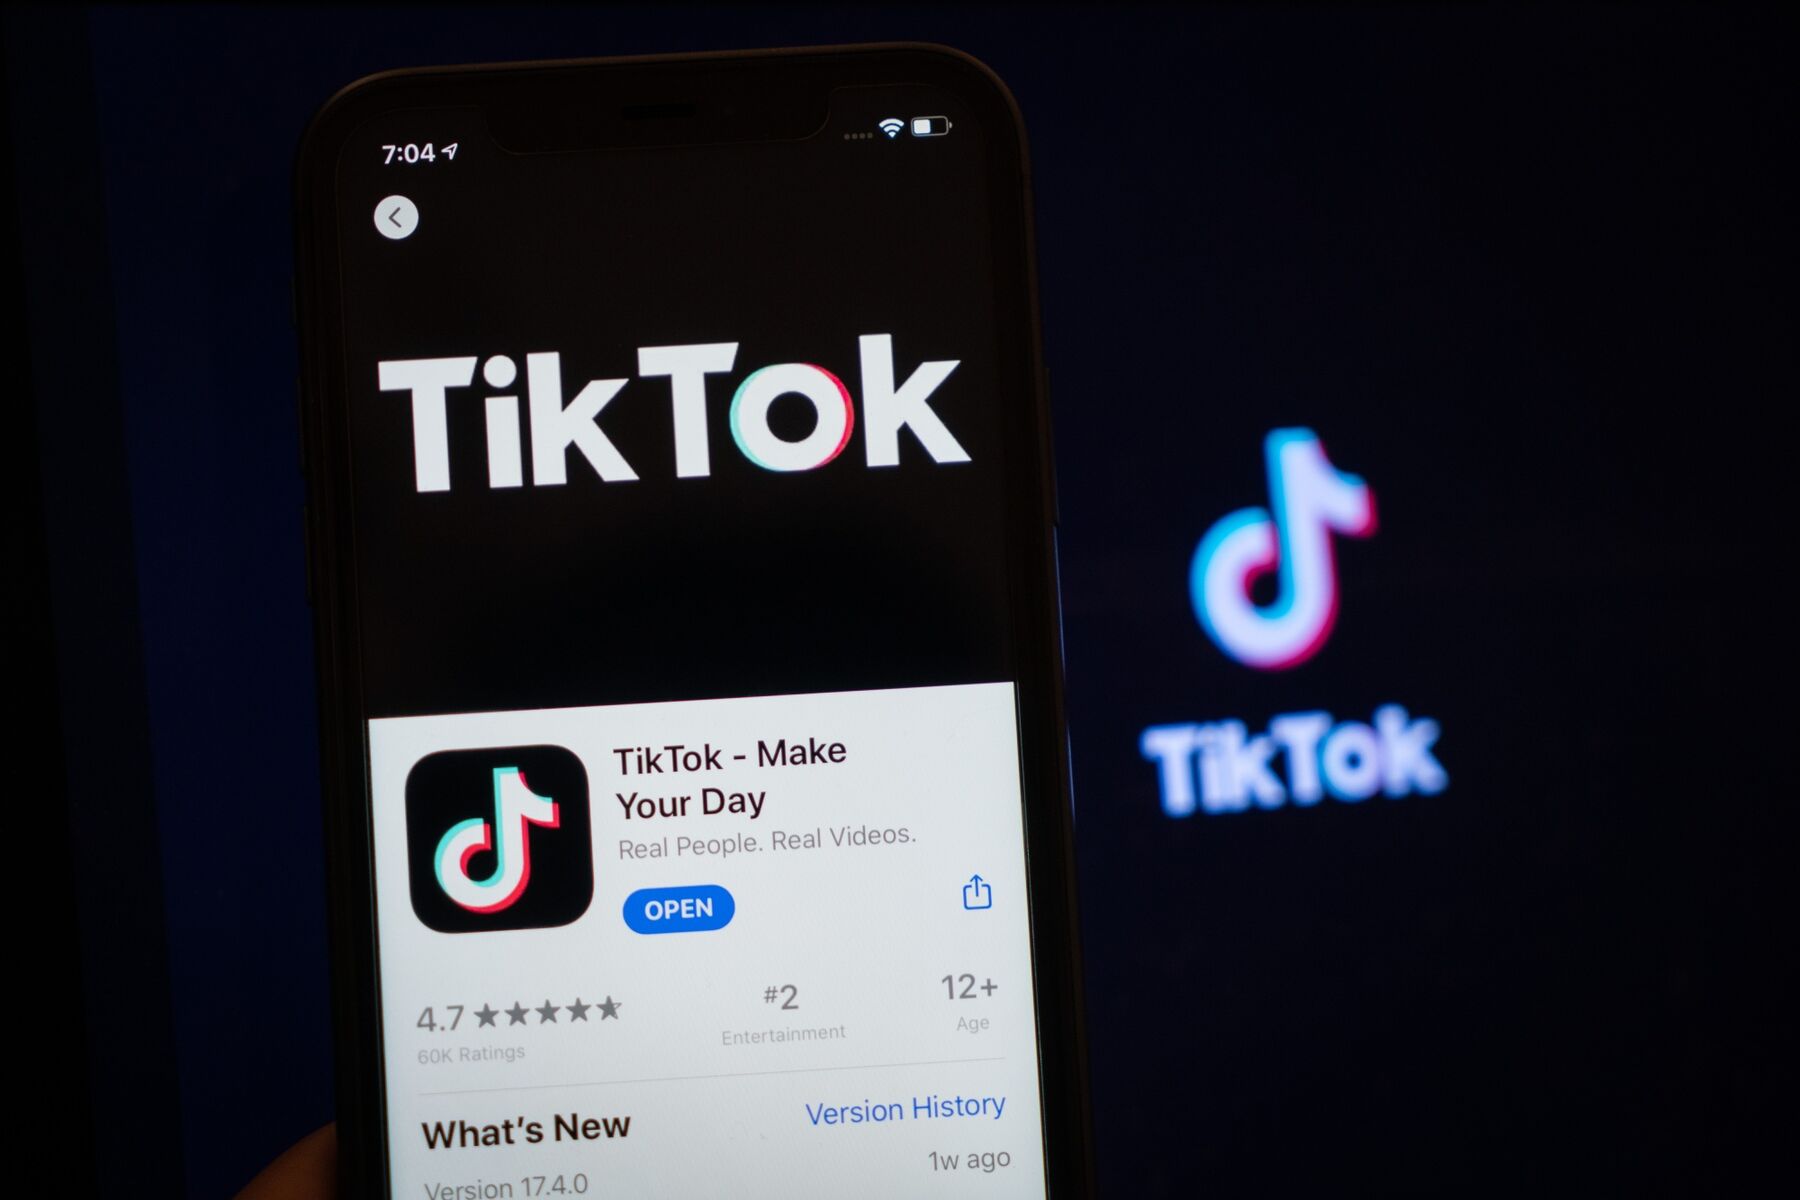 Trump Insists on Compensation for U.S. in Any TikTok Sale